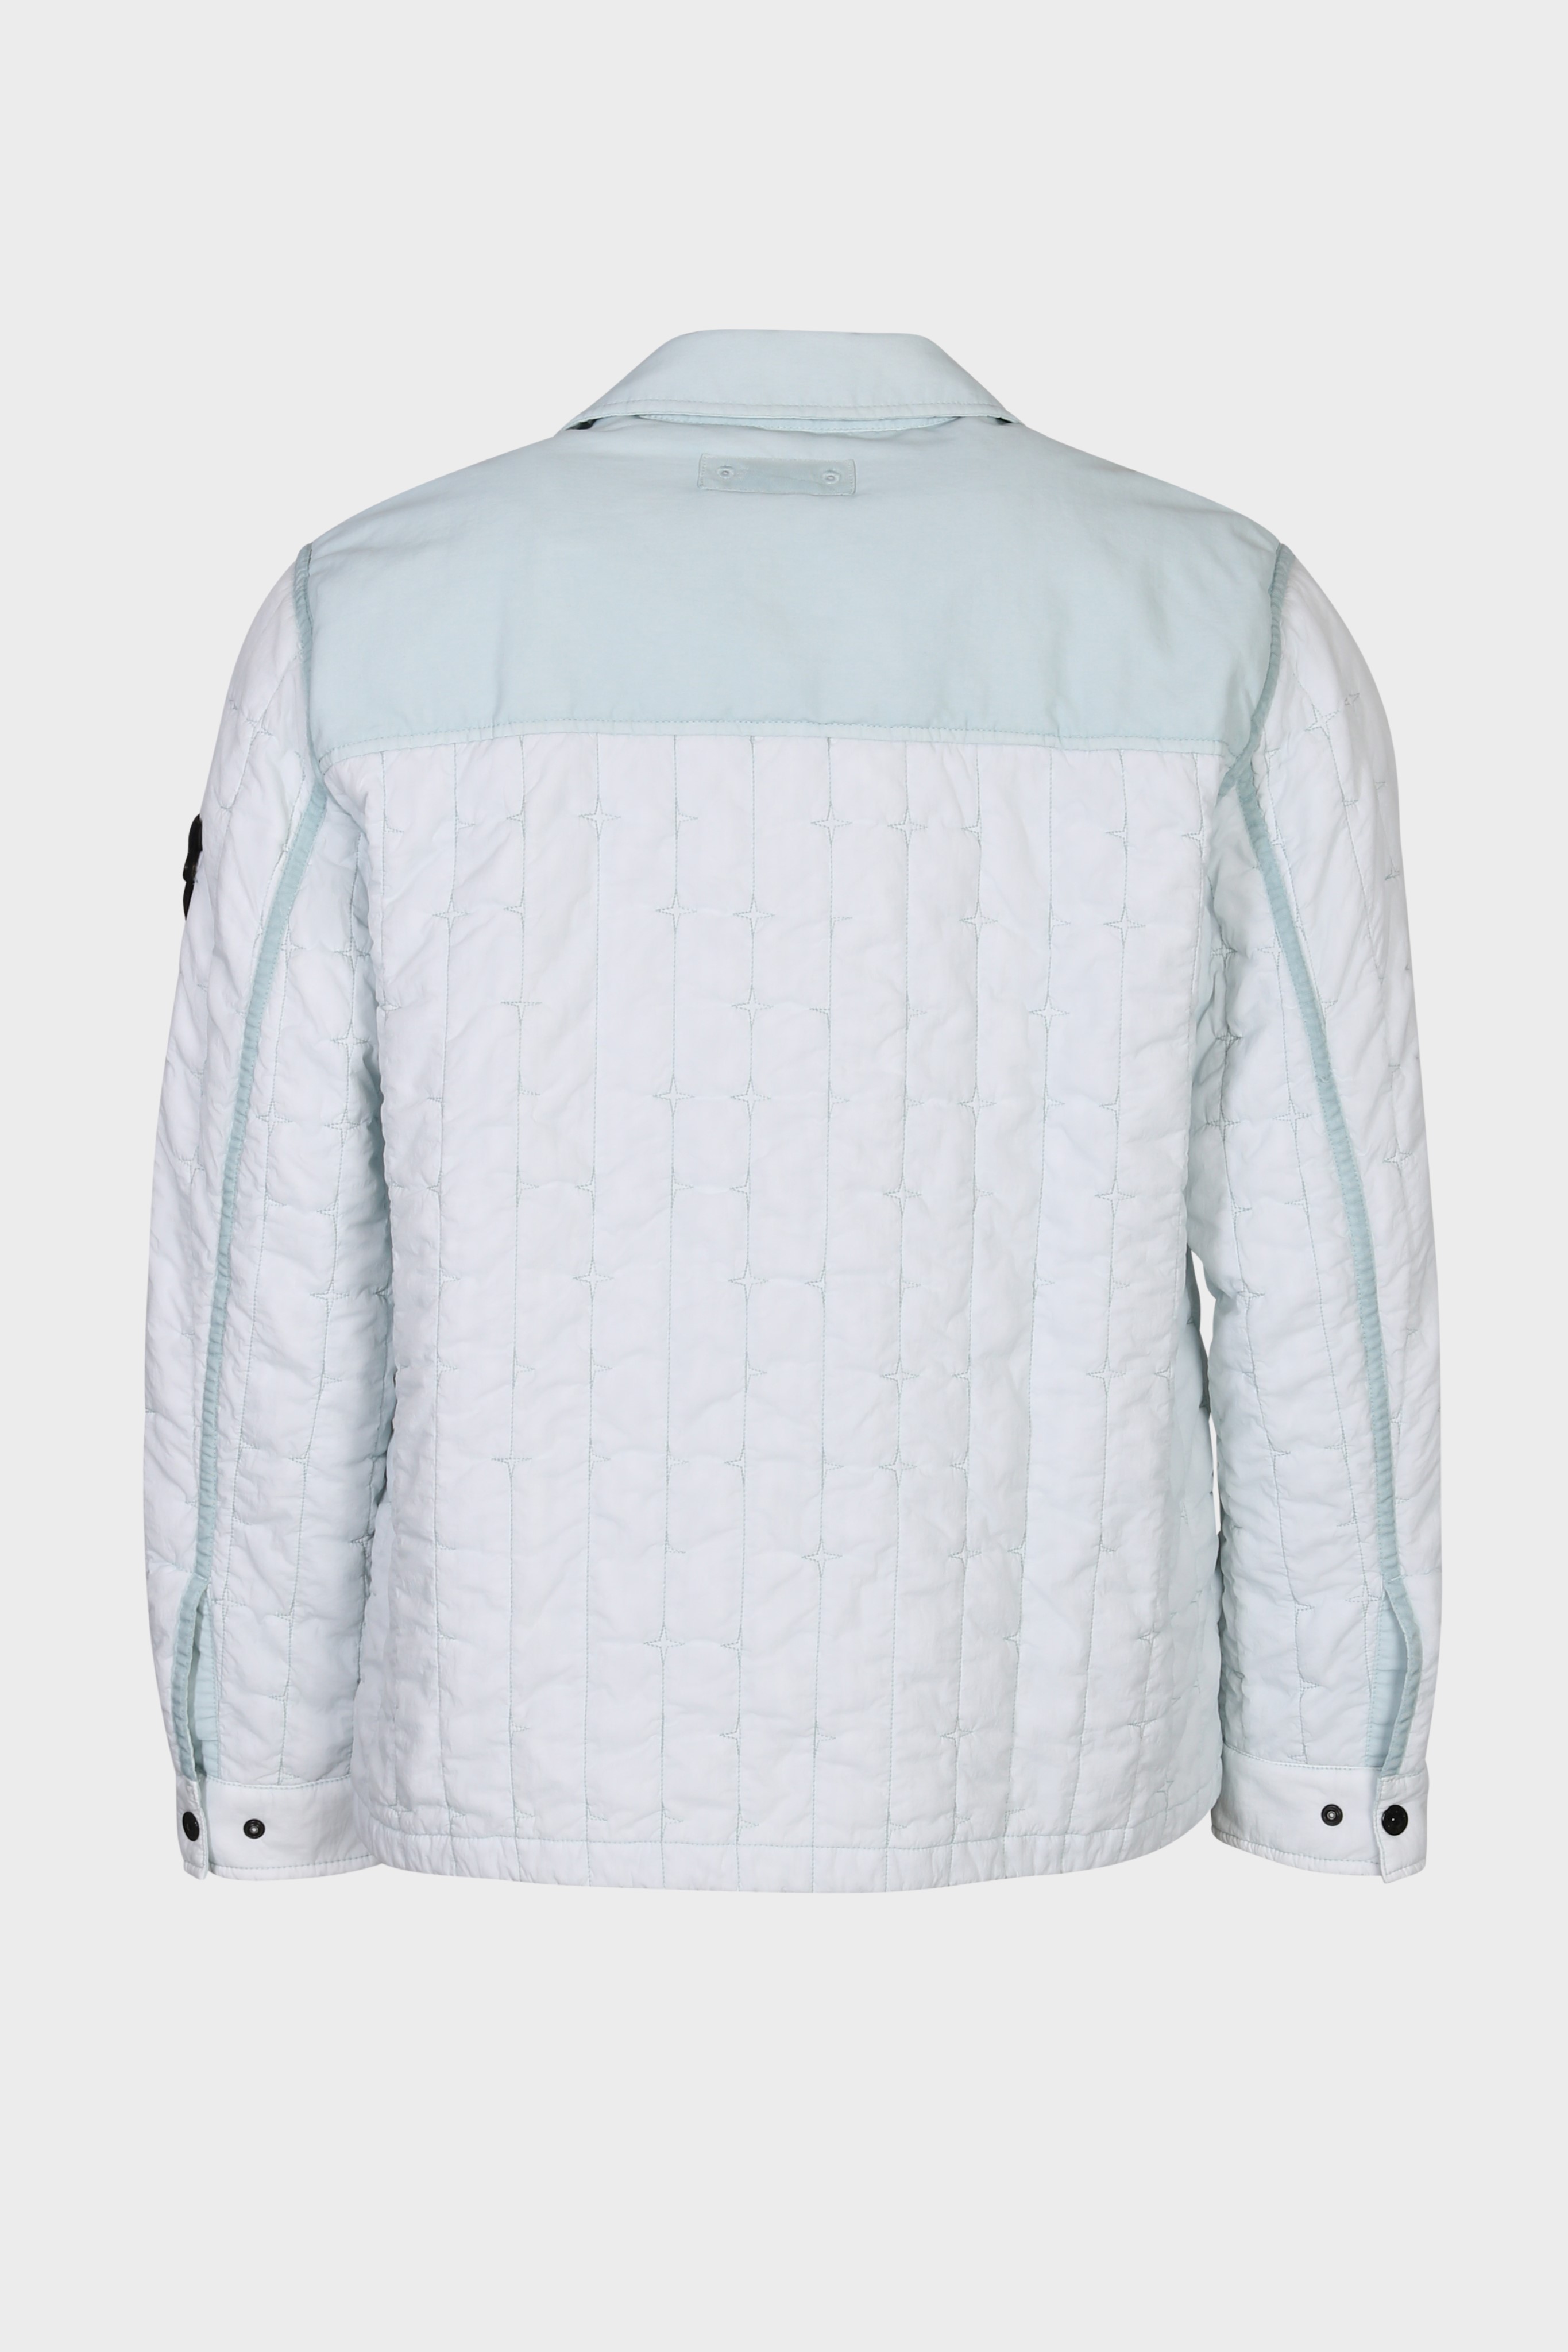 STONE ISLAND Quilted Nylon Stella Jacket in Sky Blue L